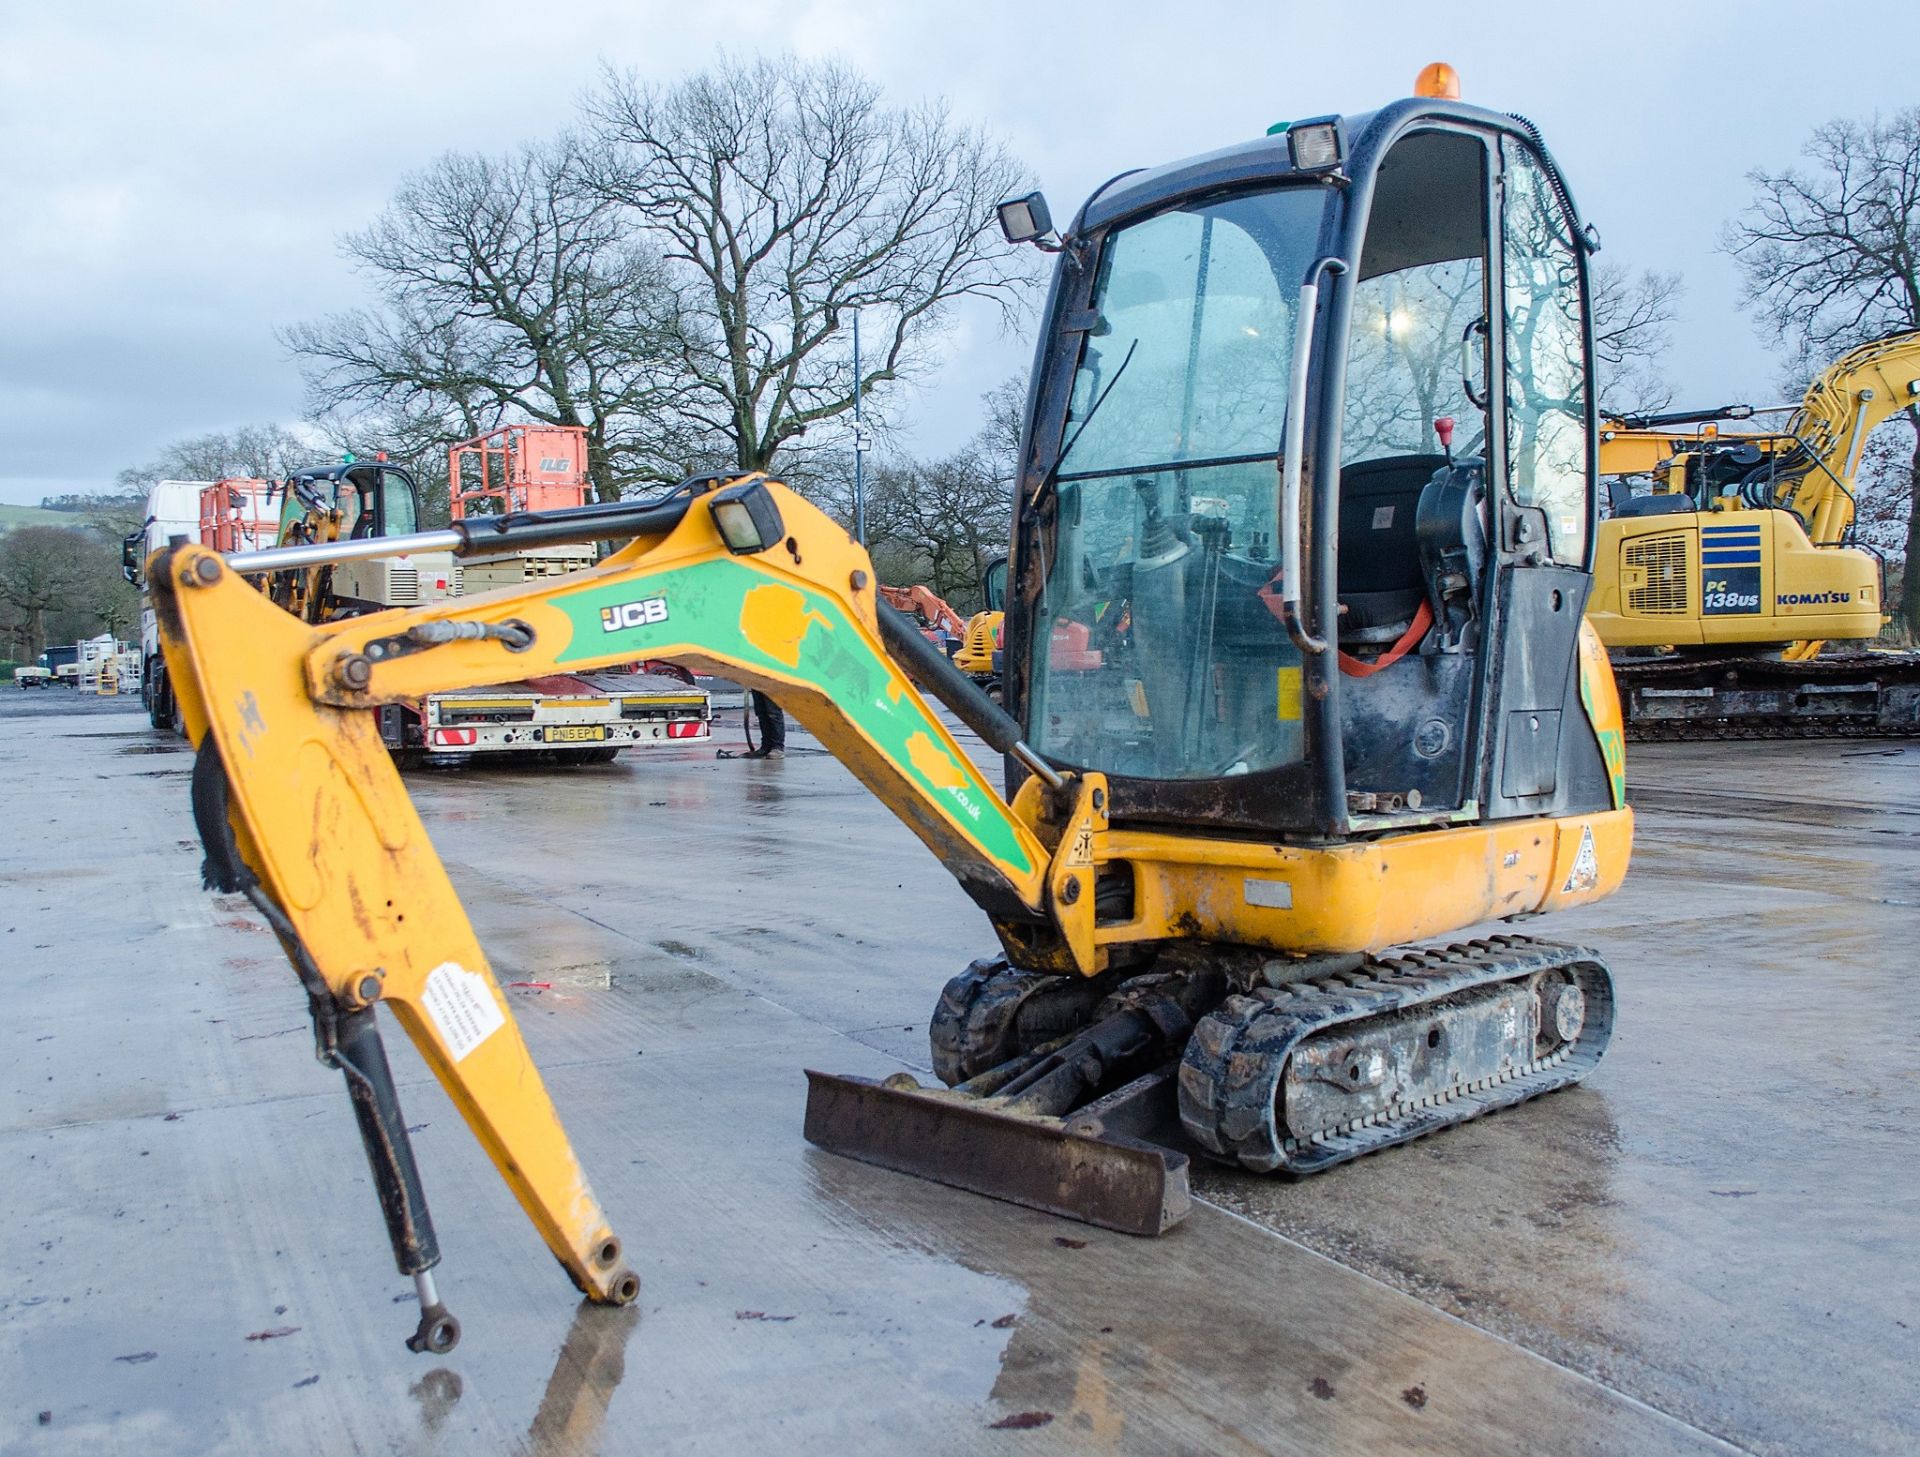 JCB 8016 1.6 tonne rubber tracked mini excavator Year: 2013 S/N: 071424 Recorded Hours: 2052 pipe